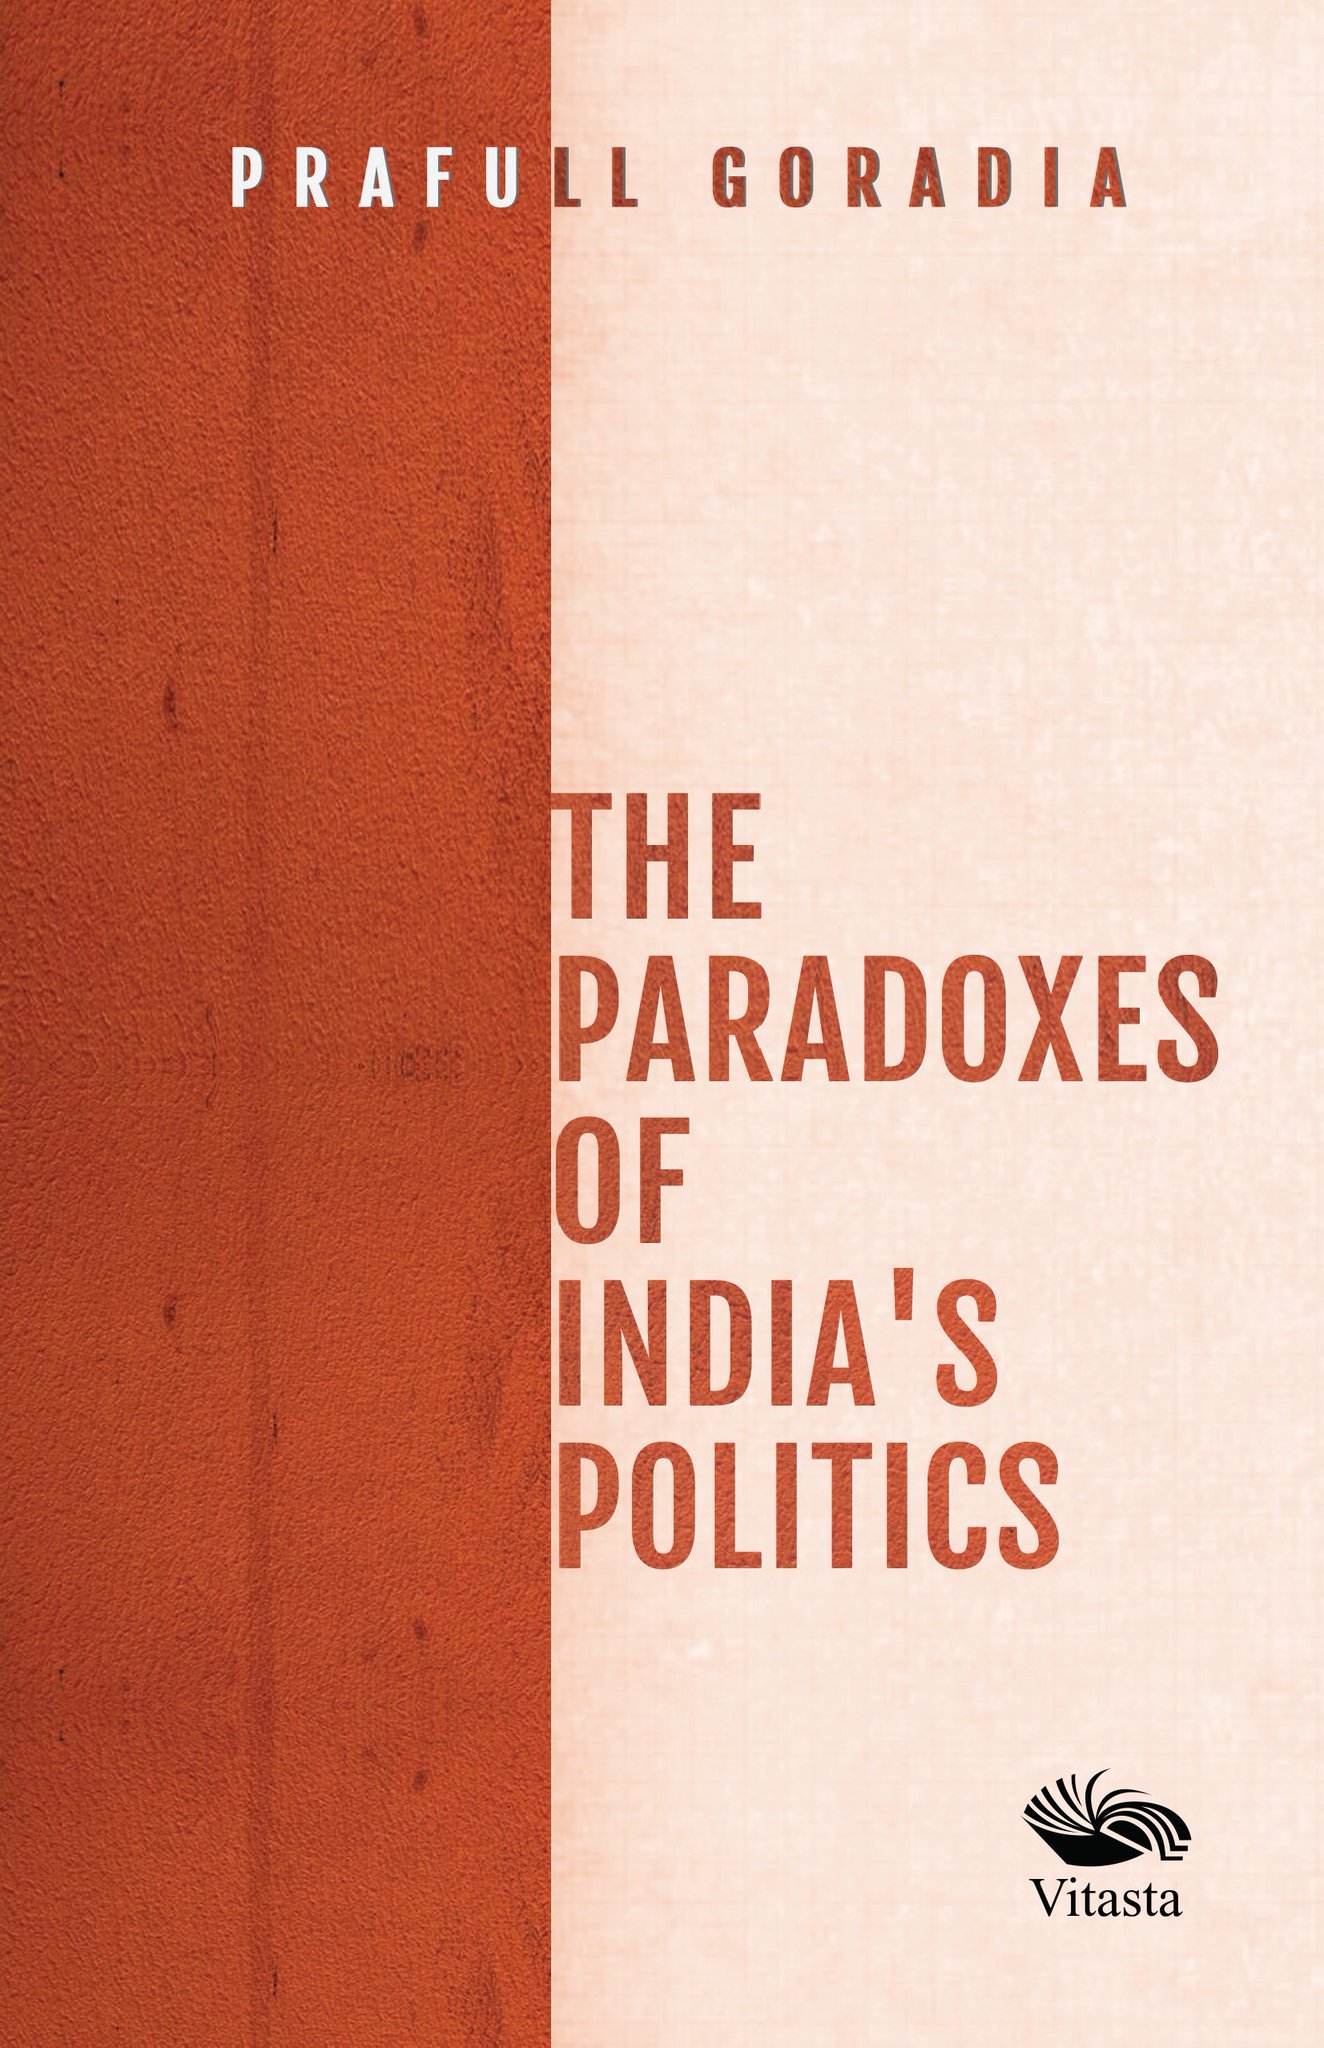 The Paradoxes of India's Politics